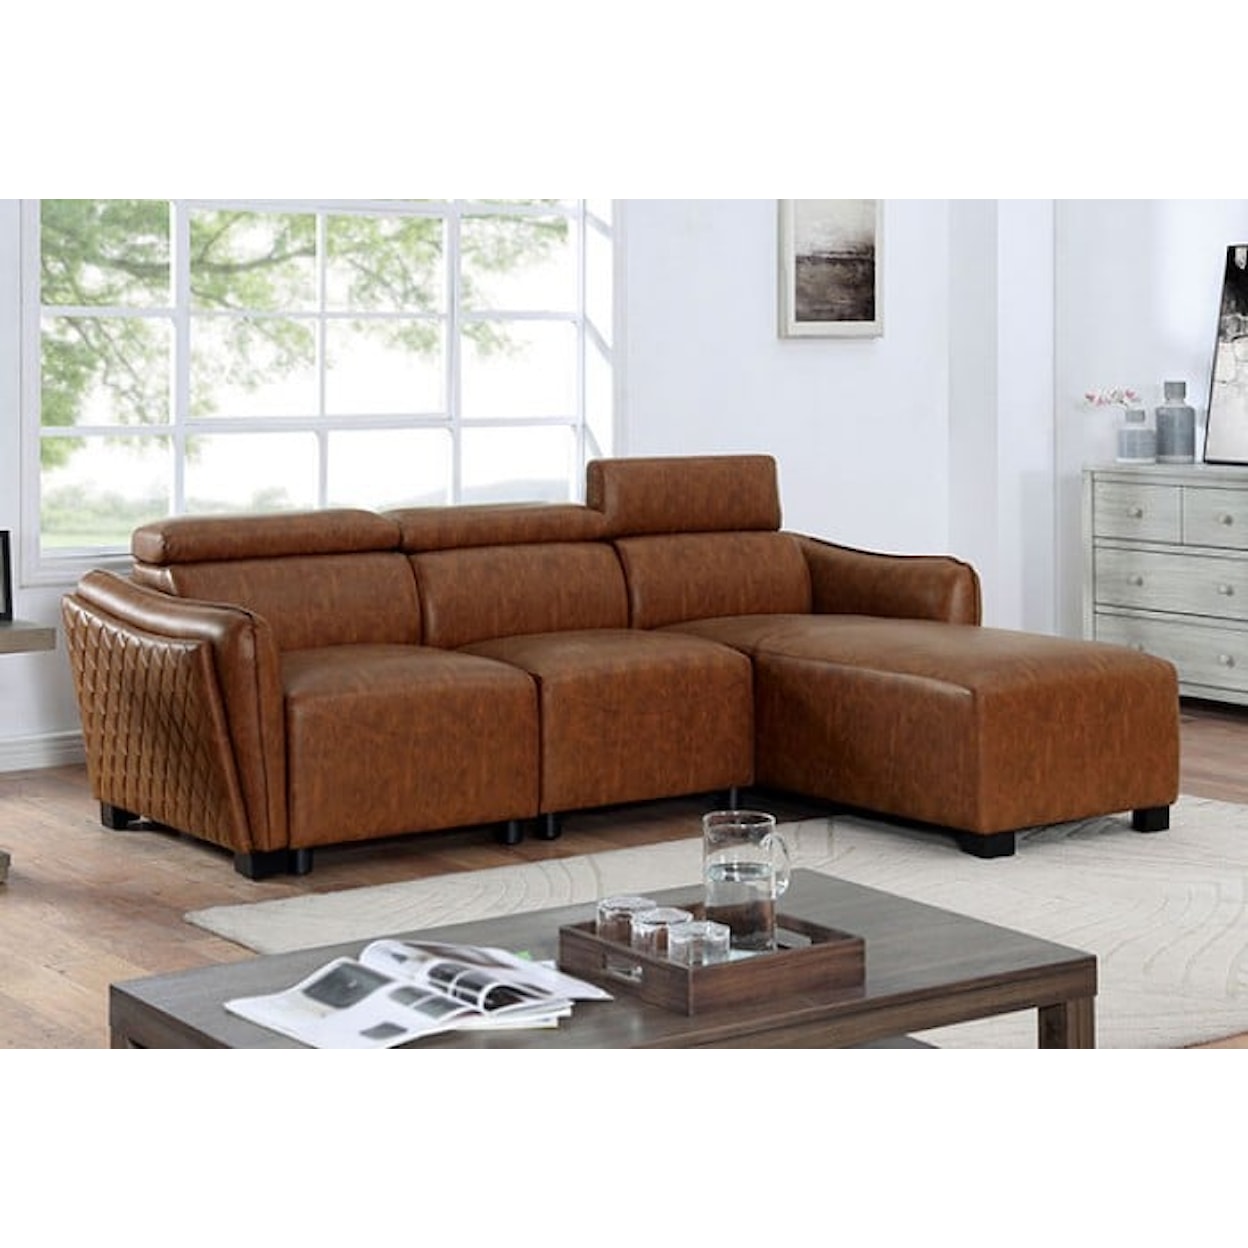 Furniture of America HOLMESTRAND Brown Large 3-Piece Sectional Sofa